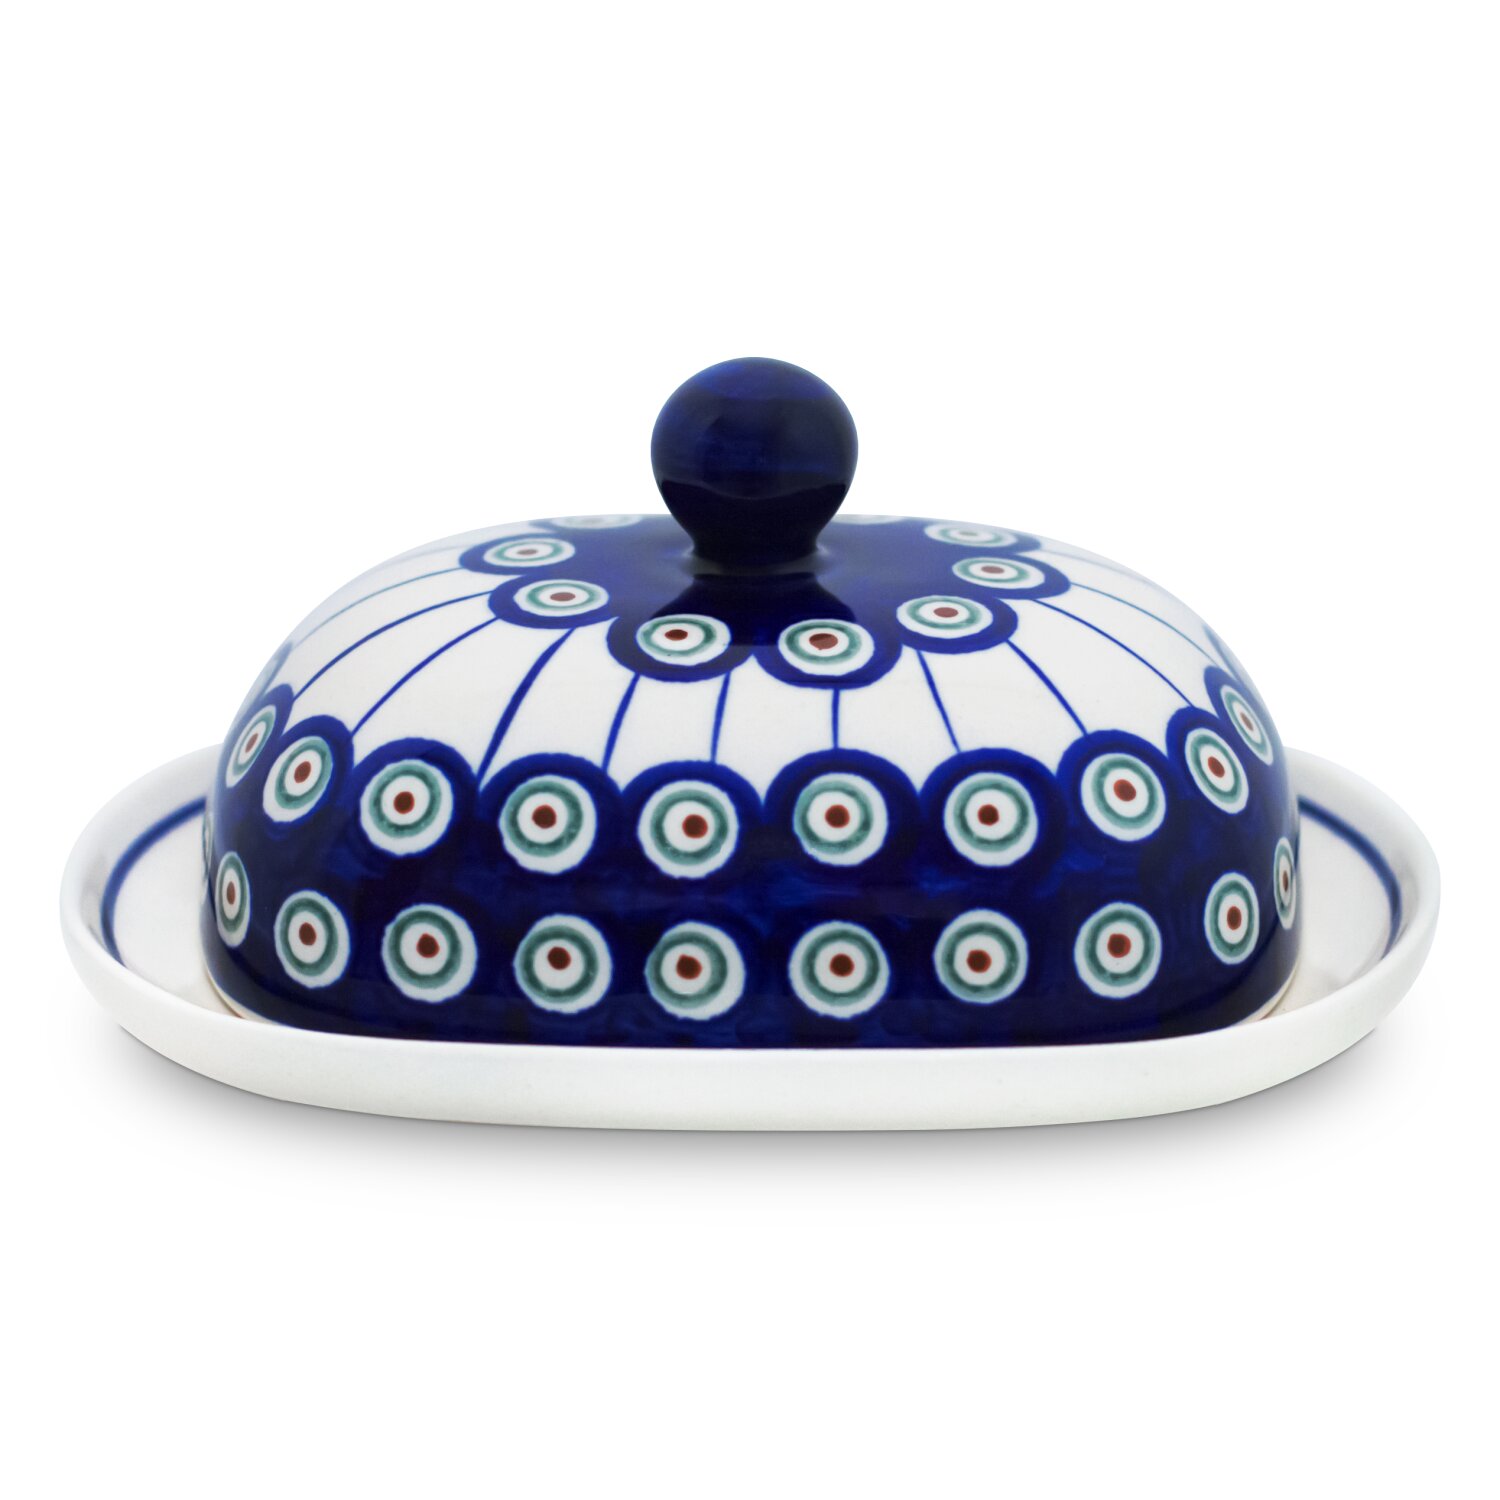 Contemporary Modern Butter Dish / The unbreakable design is perfect for ...